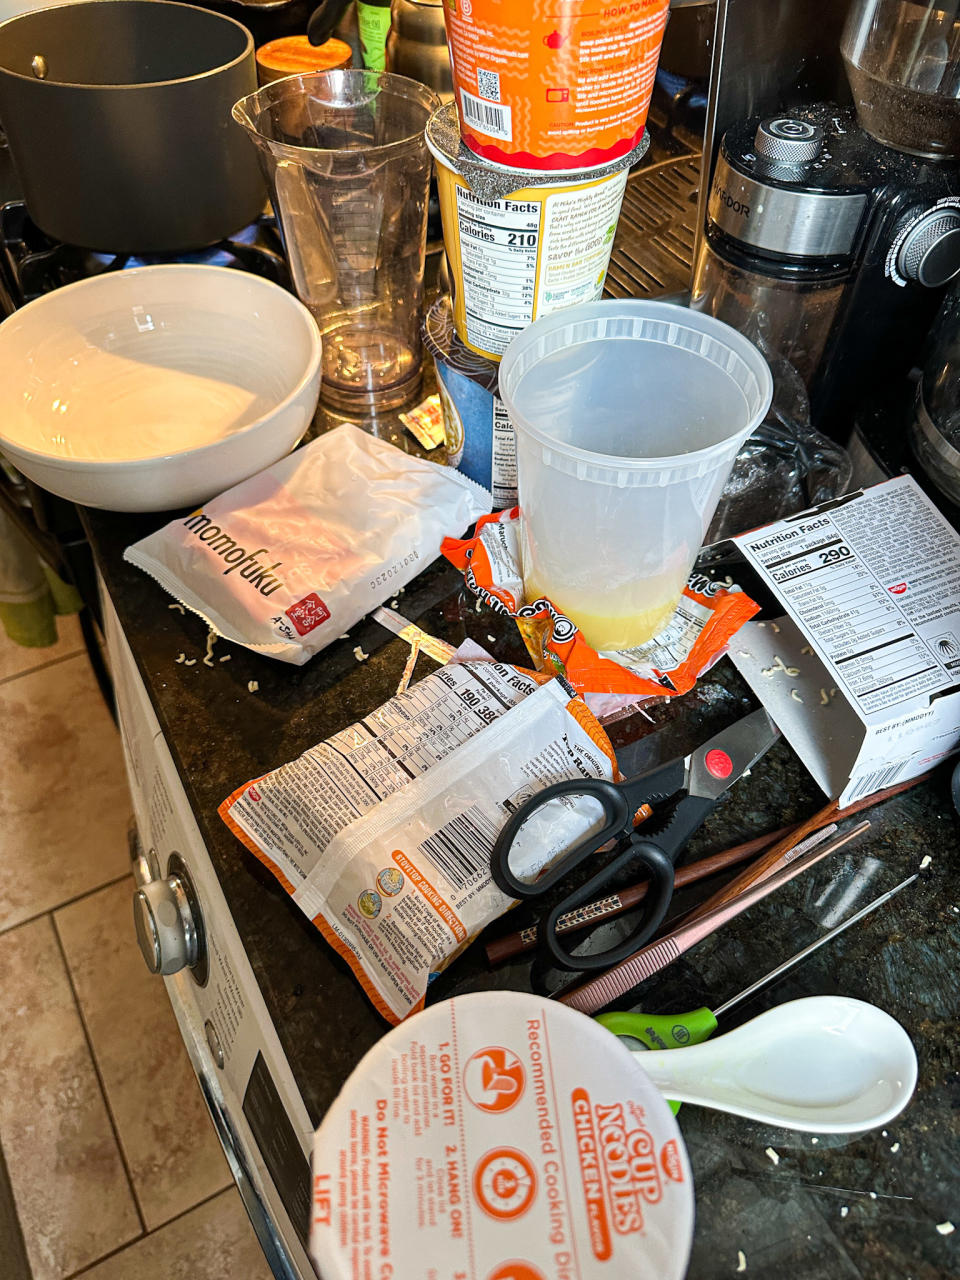 various ramen packaging and bowls strewn about author's counter